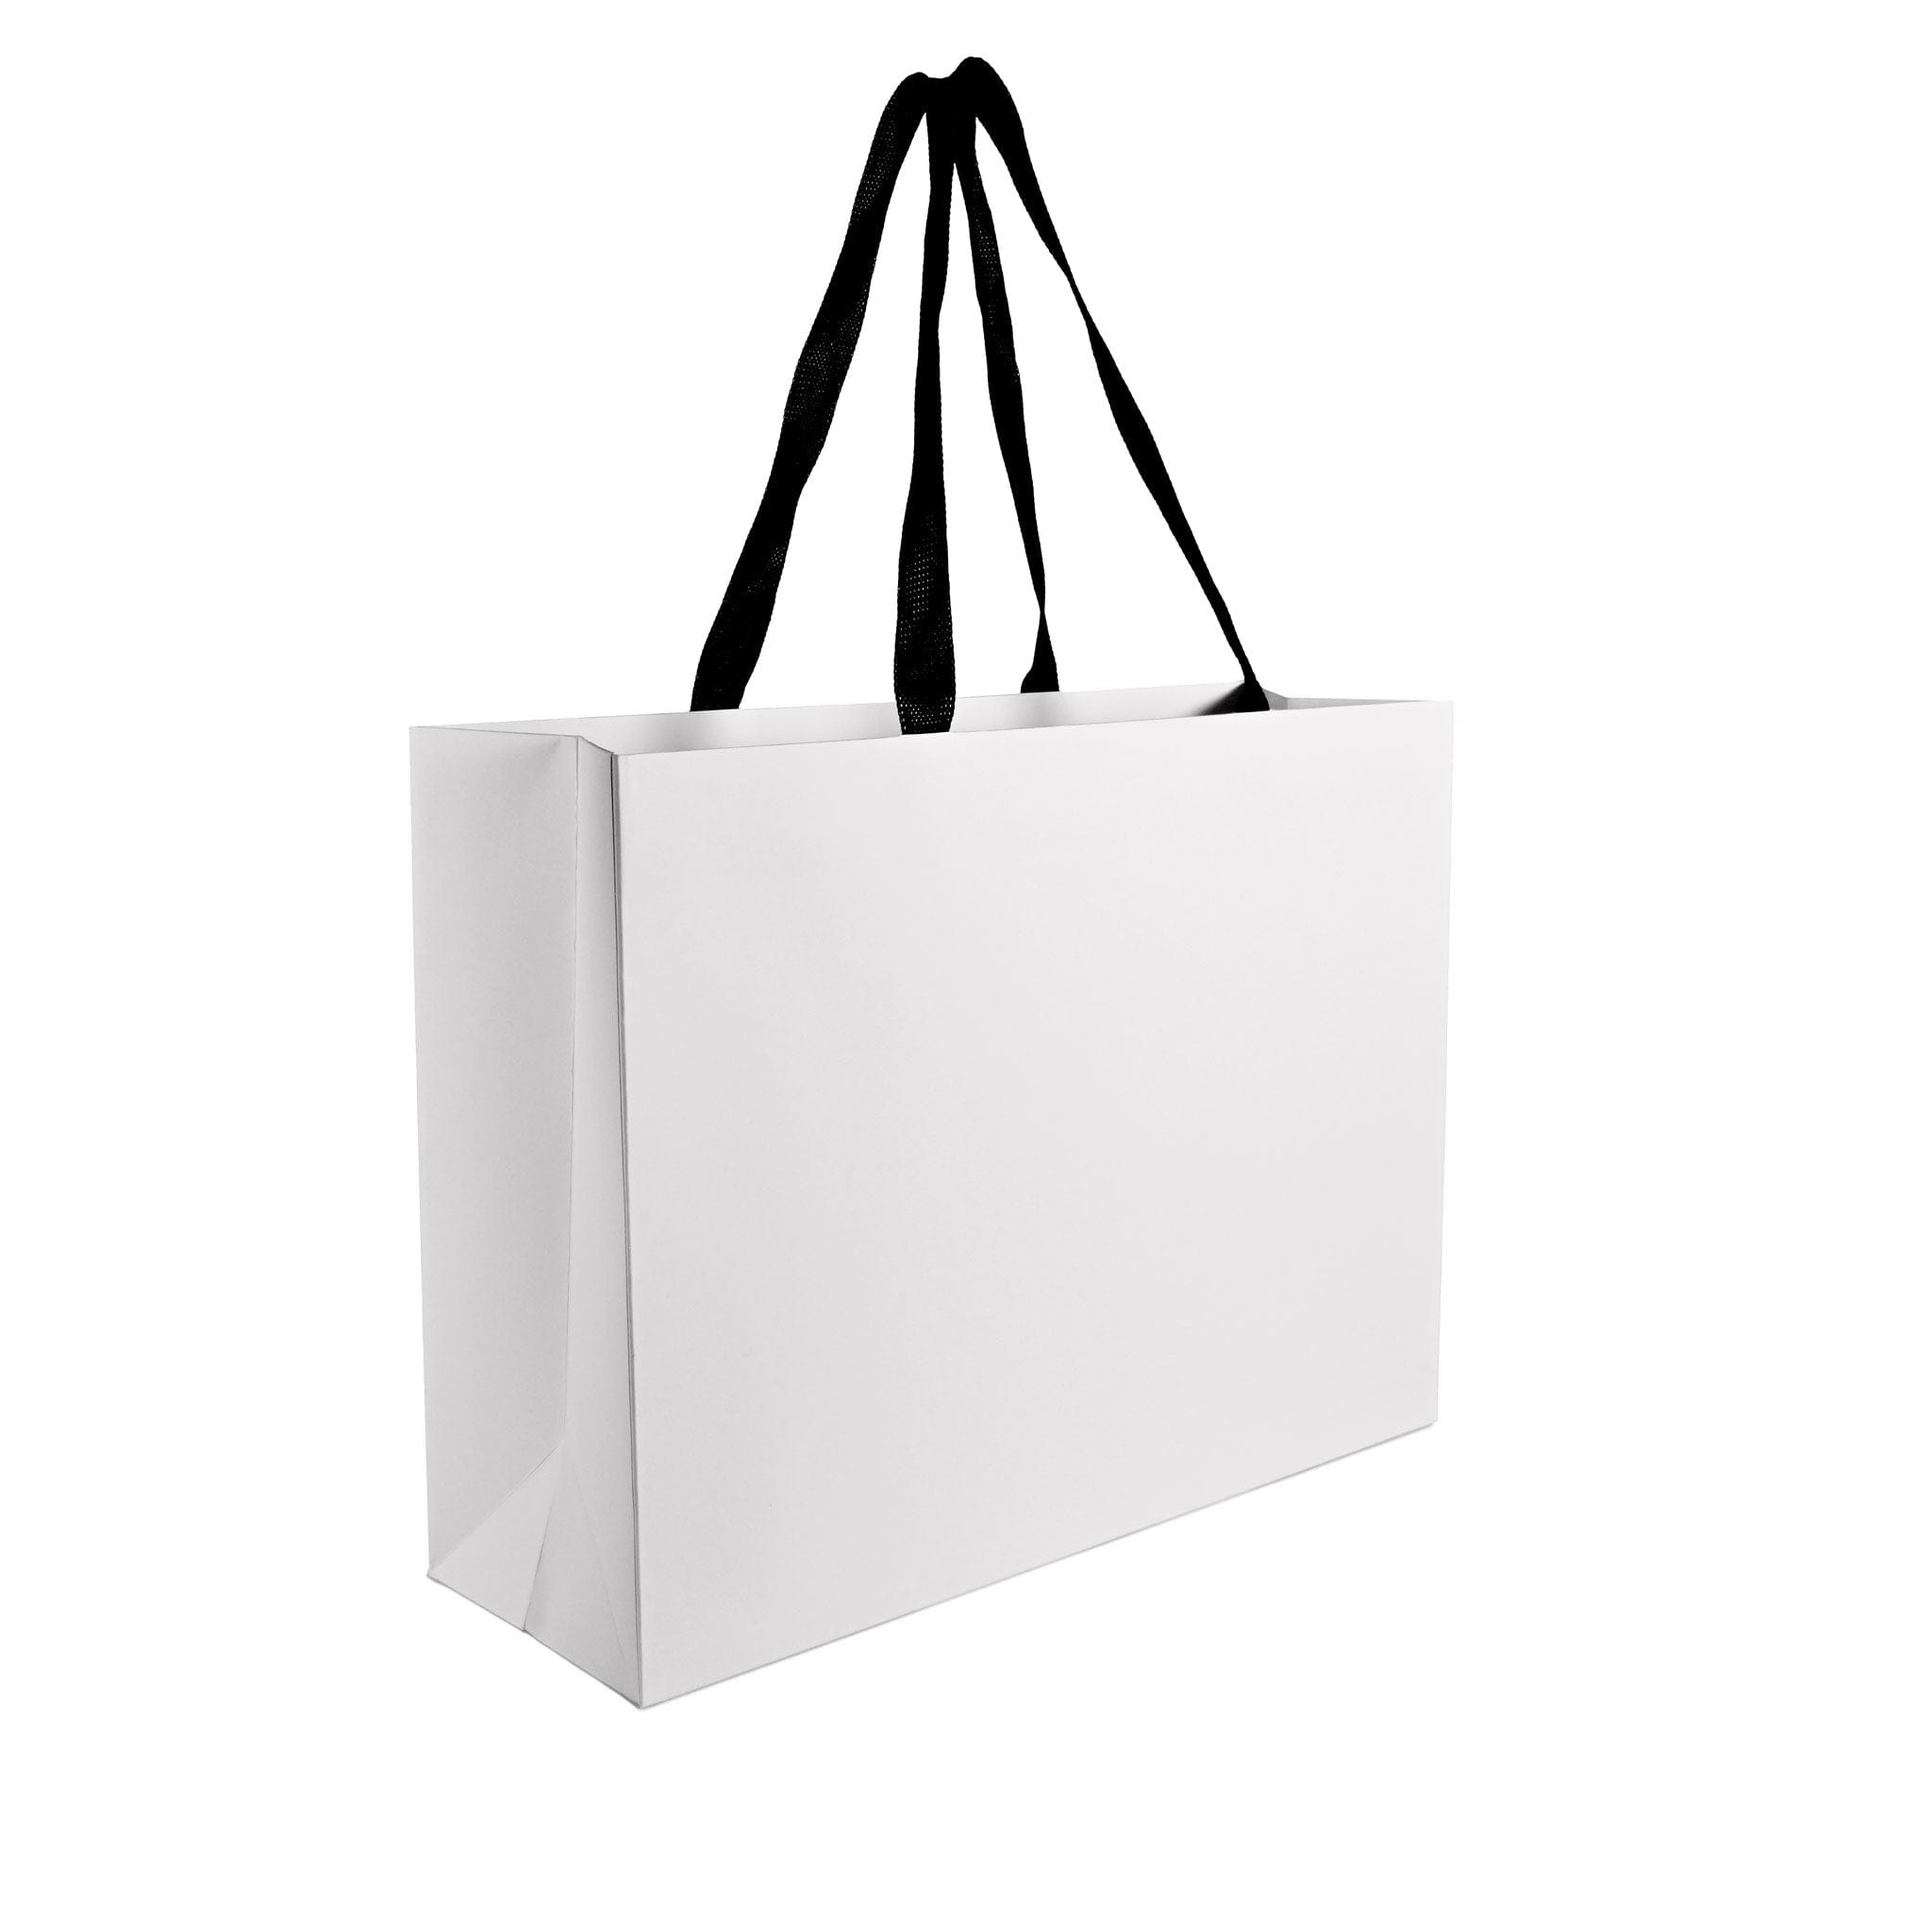 large white paper bag with woven handle